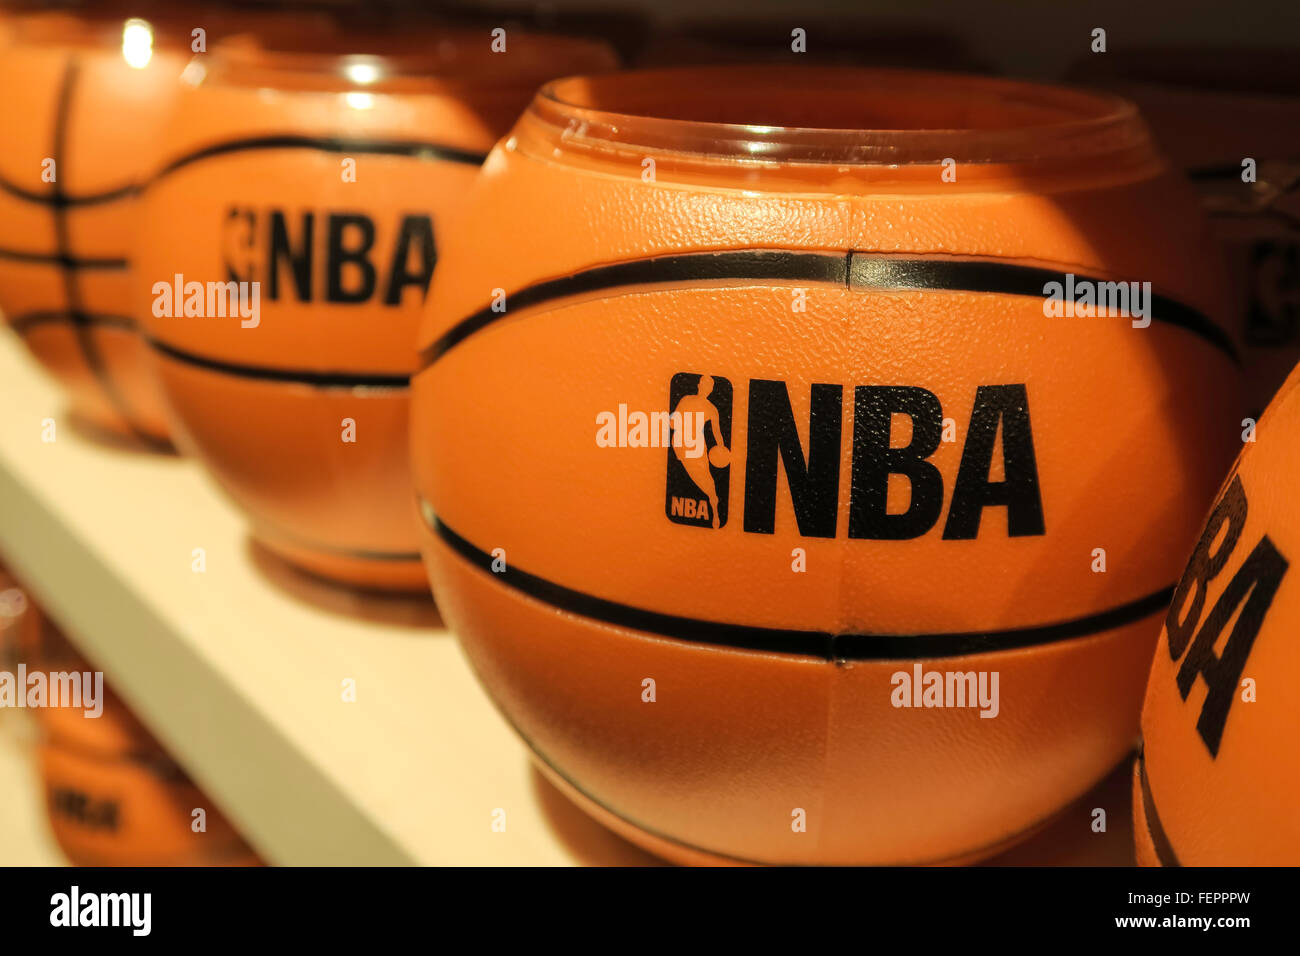 NBA STORE - 213 Photos & 84 Reviews - 545 5th Ave, New York, New